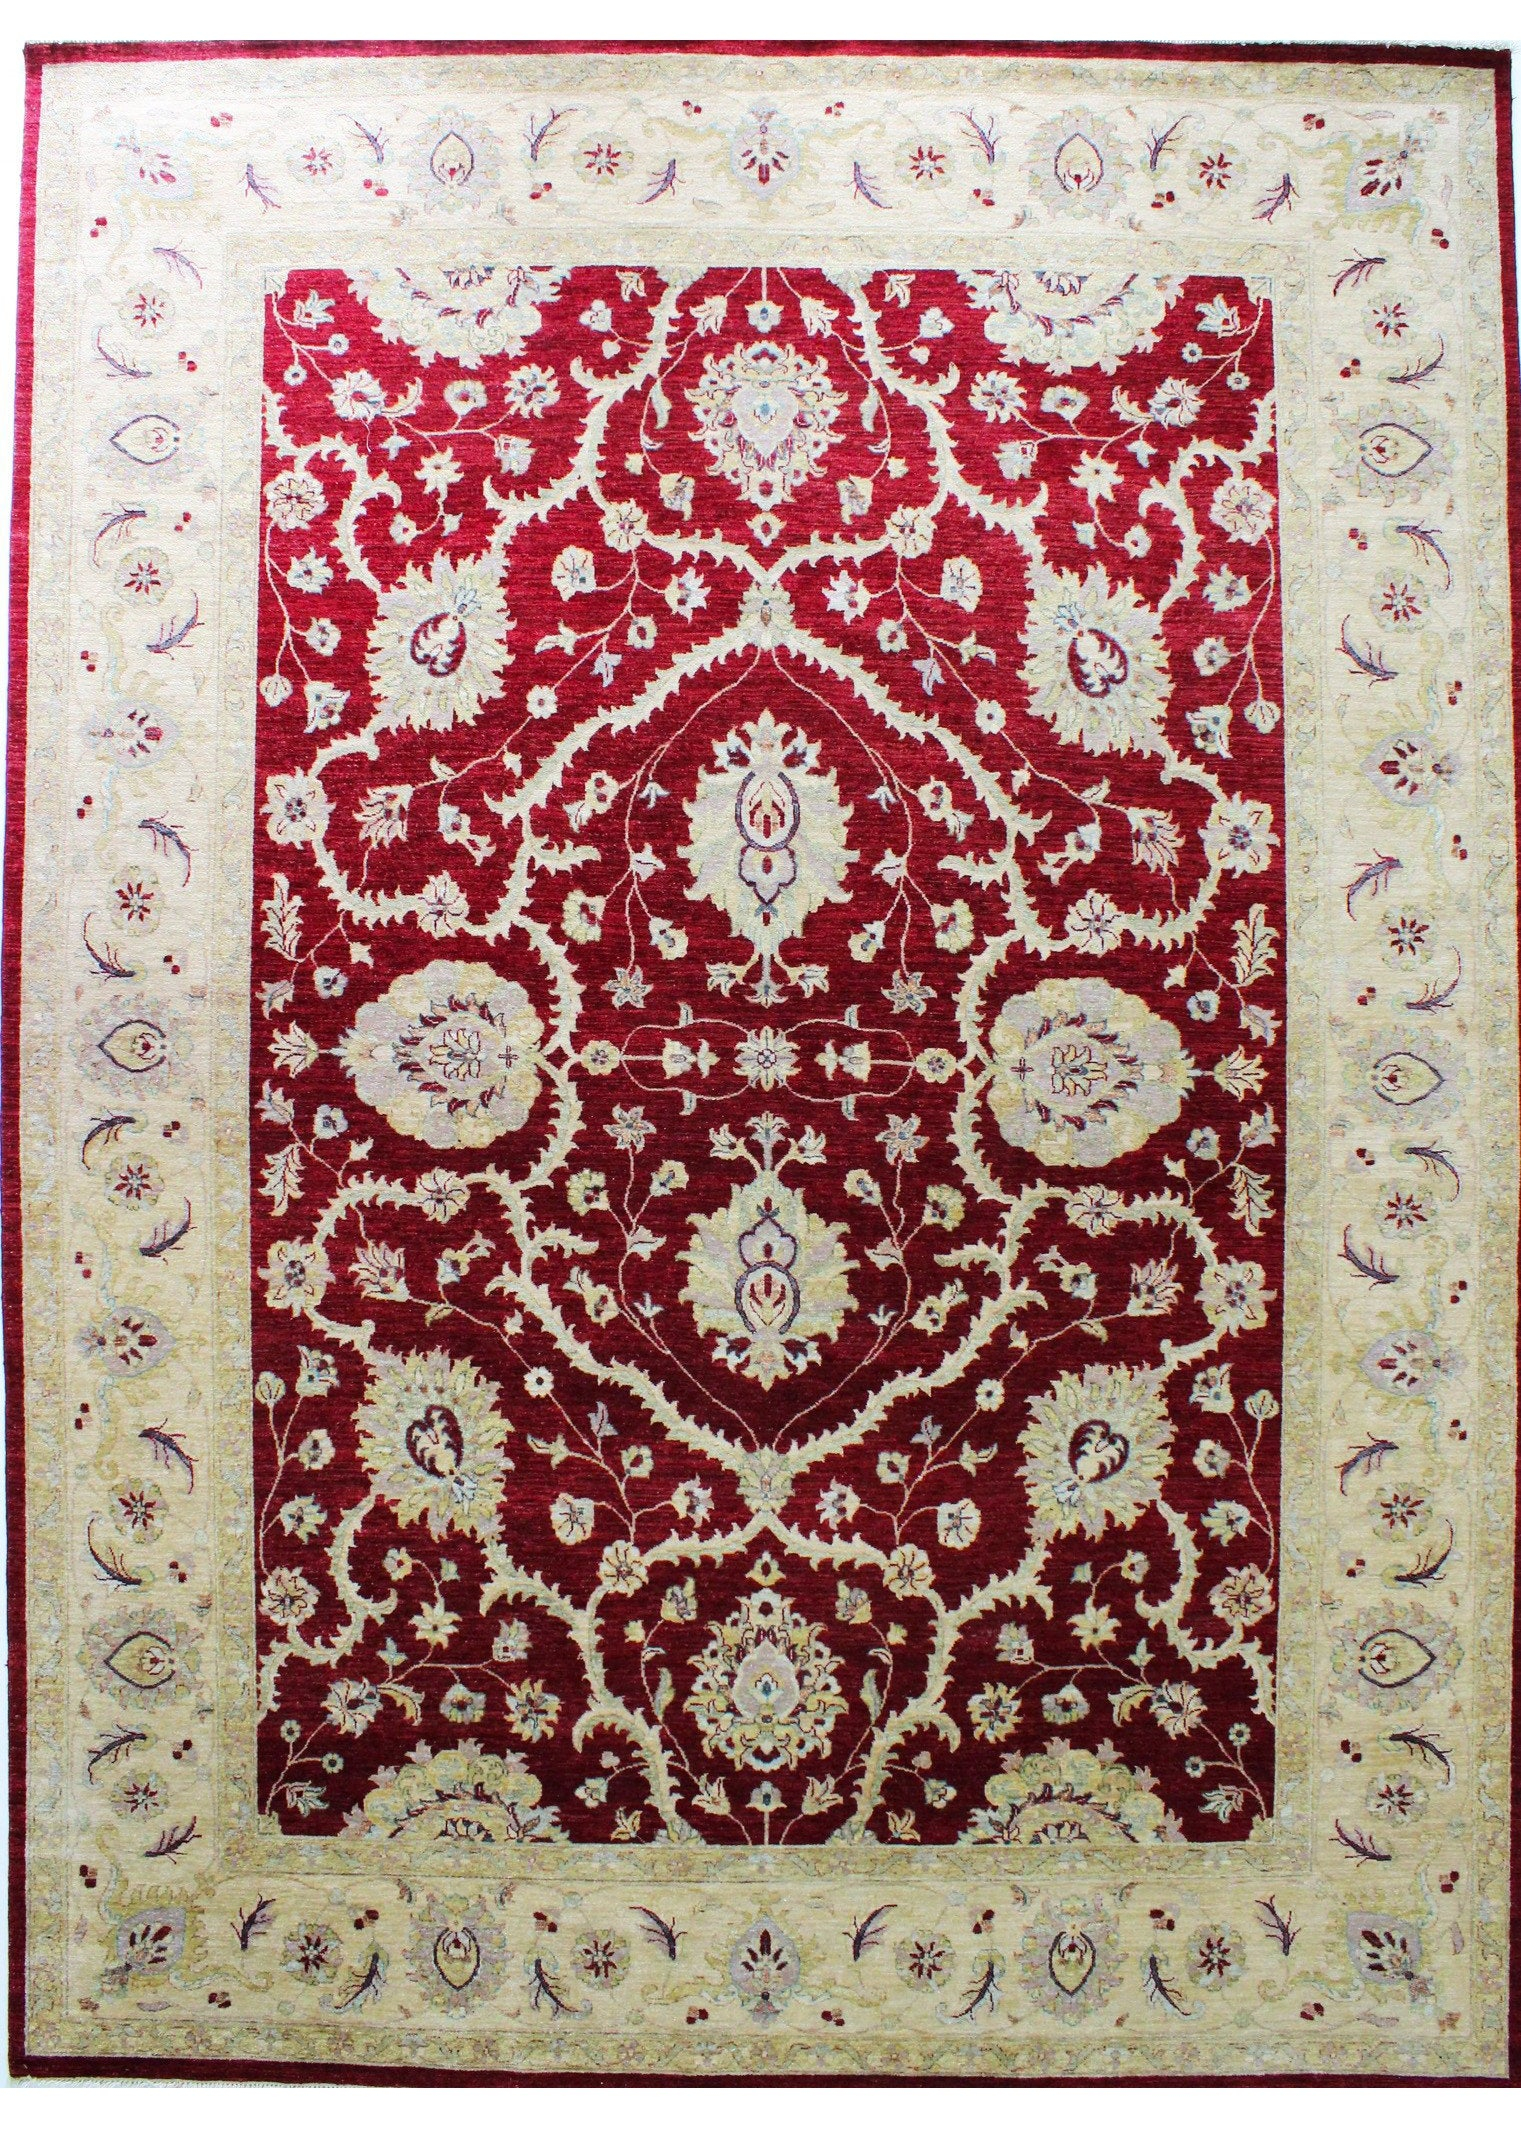 Area rug for living space and any room. Floor decor, rugs and carpets from Tabrizi Rugs. Chobi DC-BF - 9'0